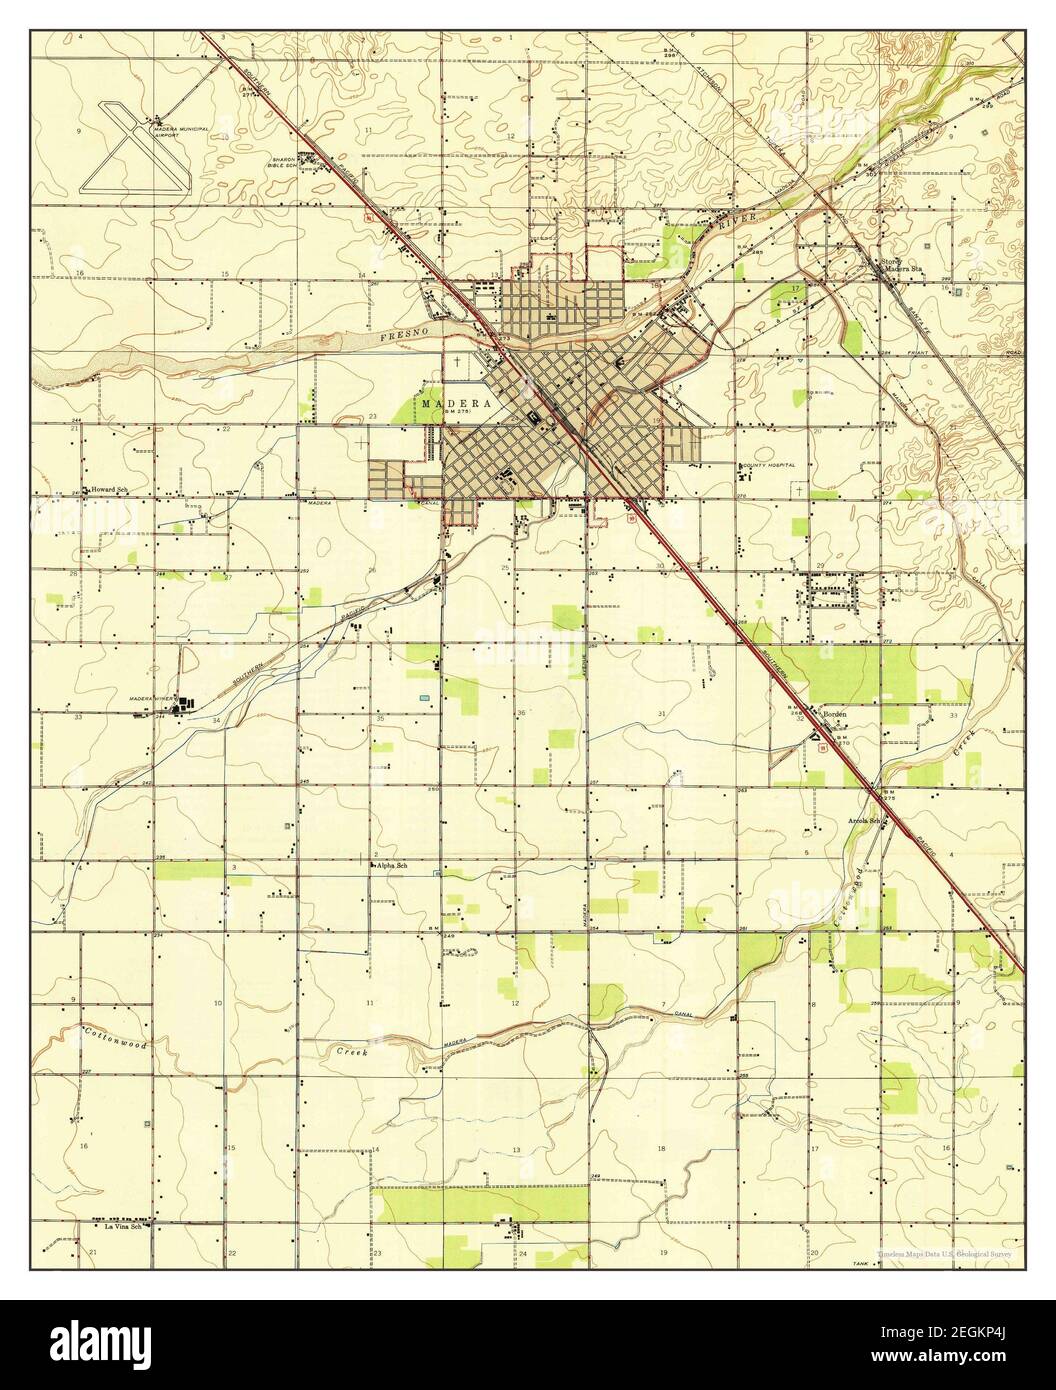 Madera, California, map 1947, 1:24000, United States of America by Timeless Maps, data U.S. Geological Survey Stock Photo